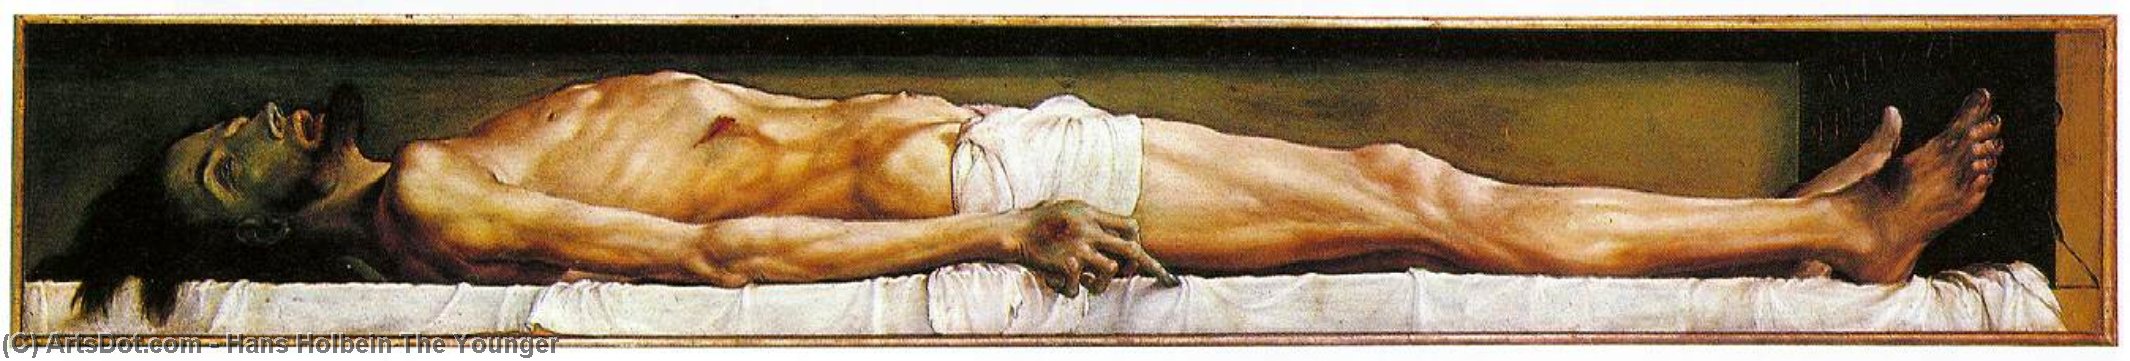 WikiOO.org - Enciclopédia das Belas Artes - Pintura, Arte por Hans Holbein The Younger - The Body of the Dead Christ in the Tomb